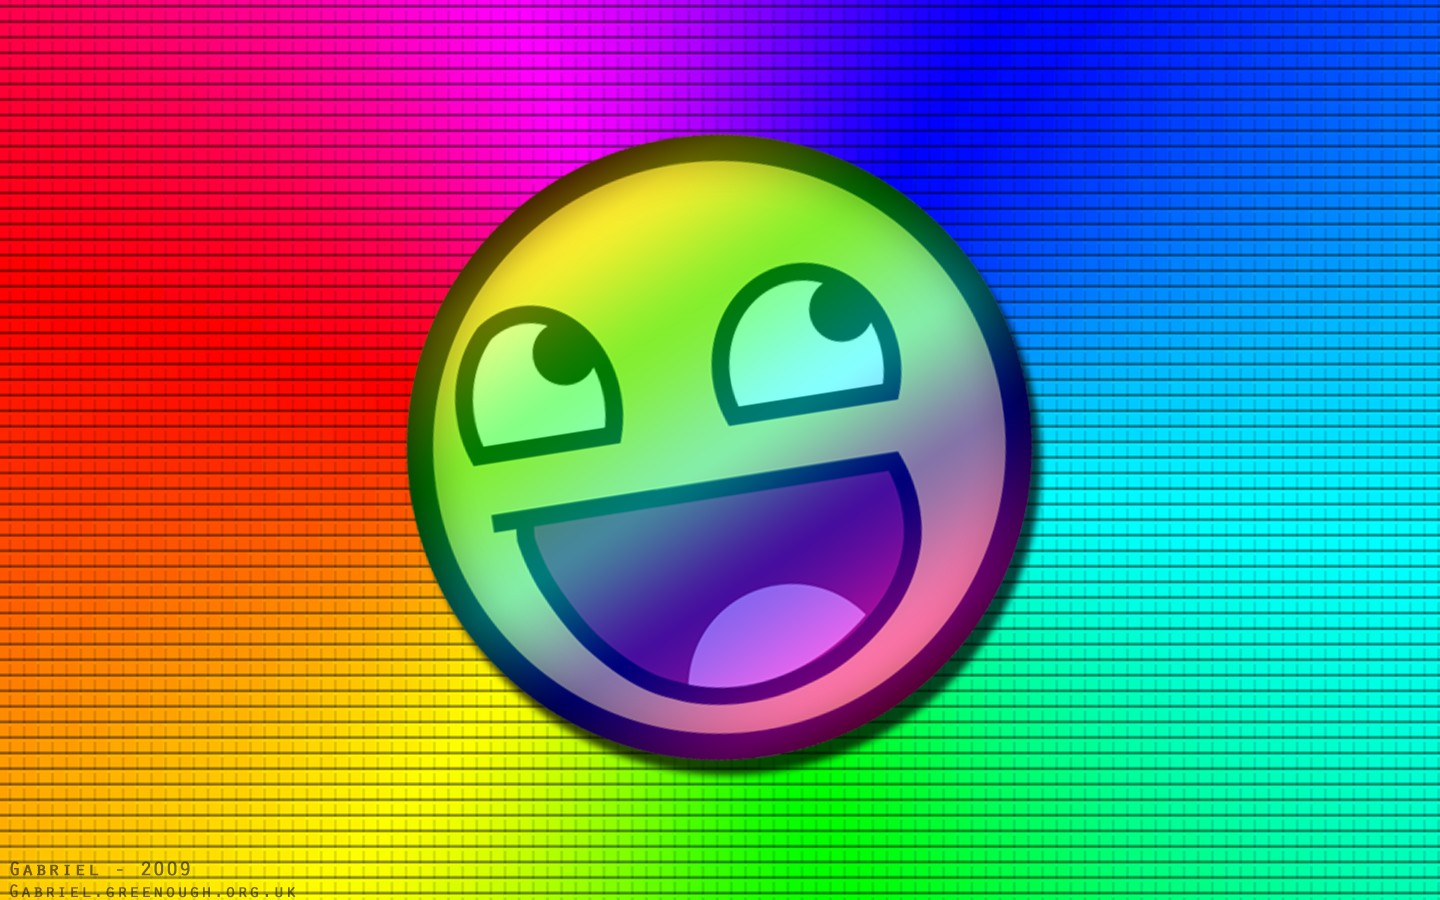 General 1440x900 emoticons awesome face colorful 2009 (Year) gradient memes digital art